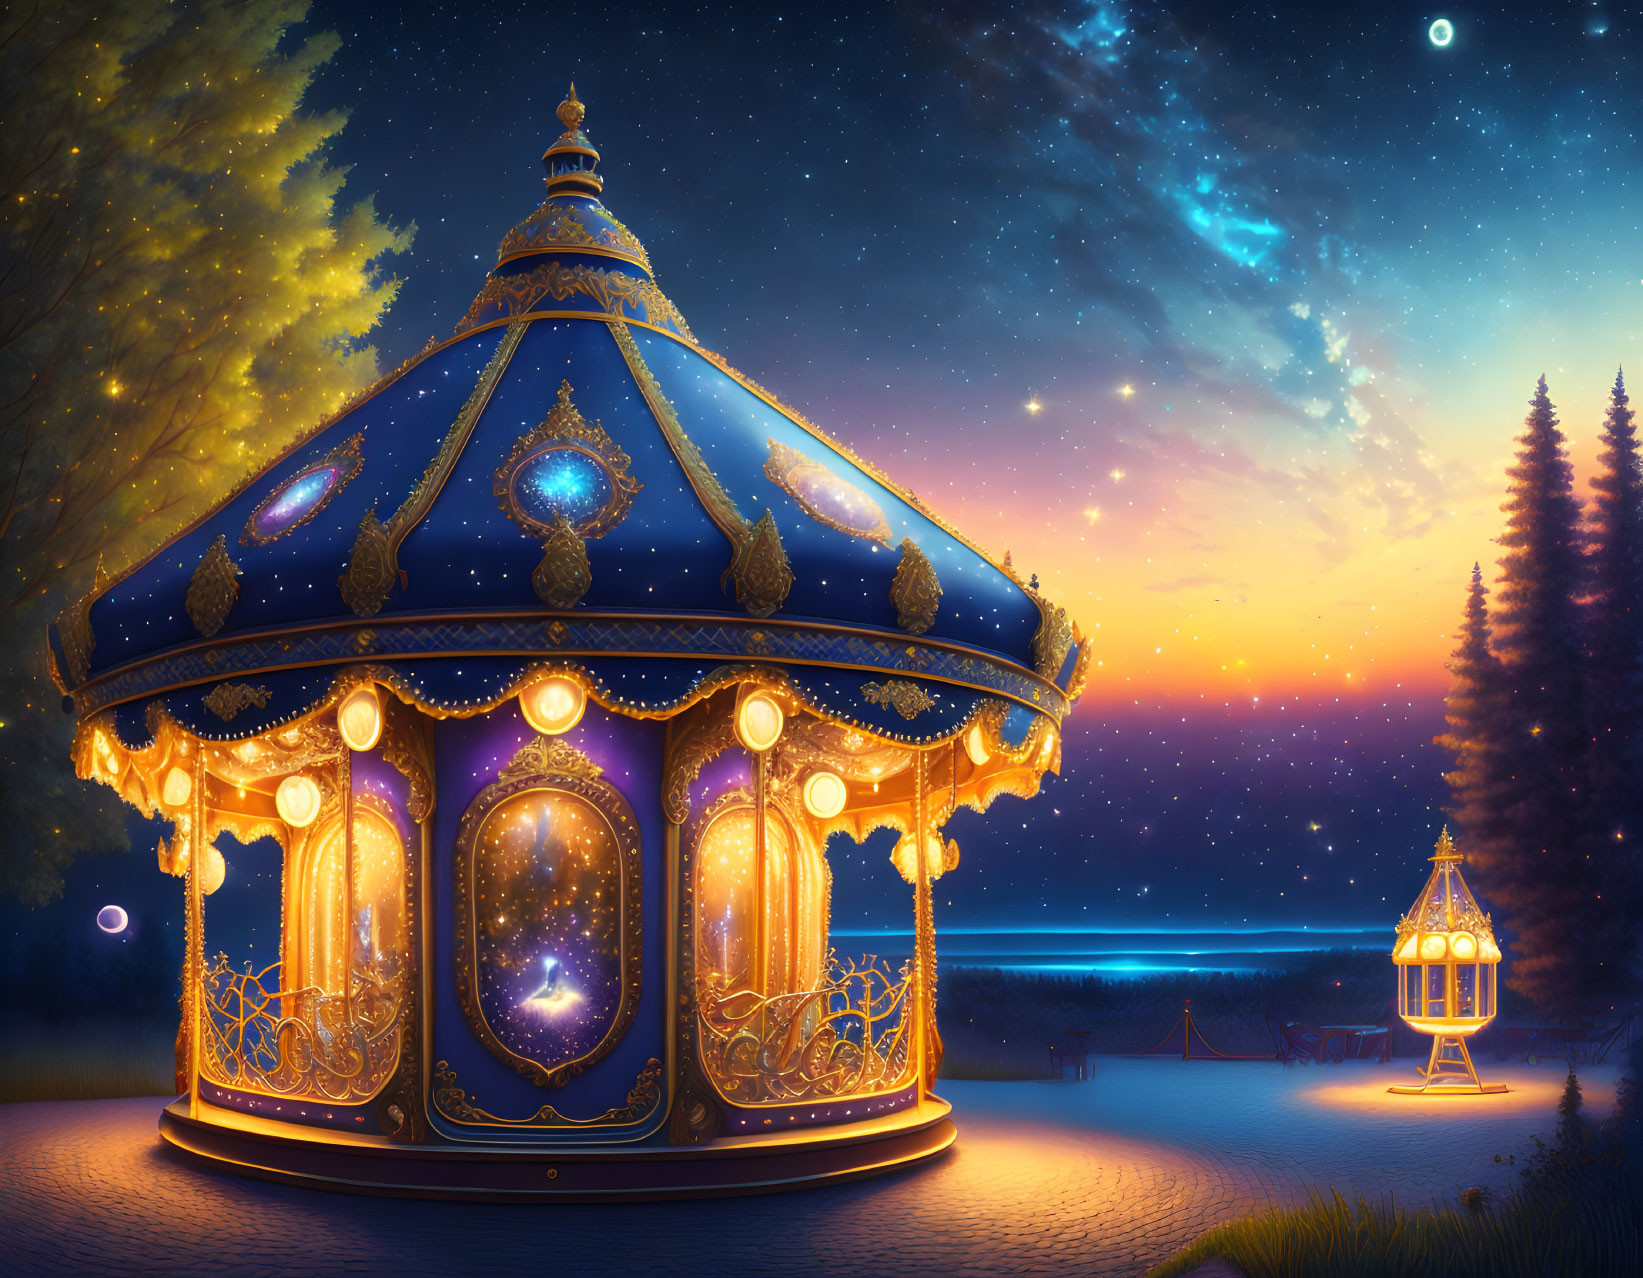 Ornate Carousel Under Starry Night Sky with Sunset, Beach, and Forest Path